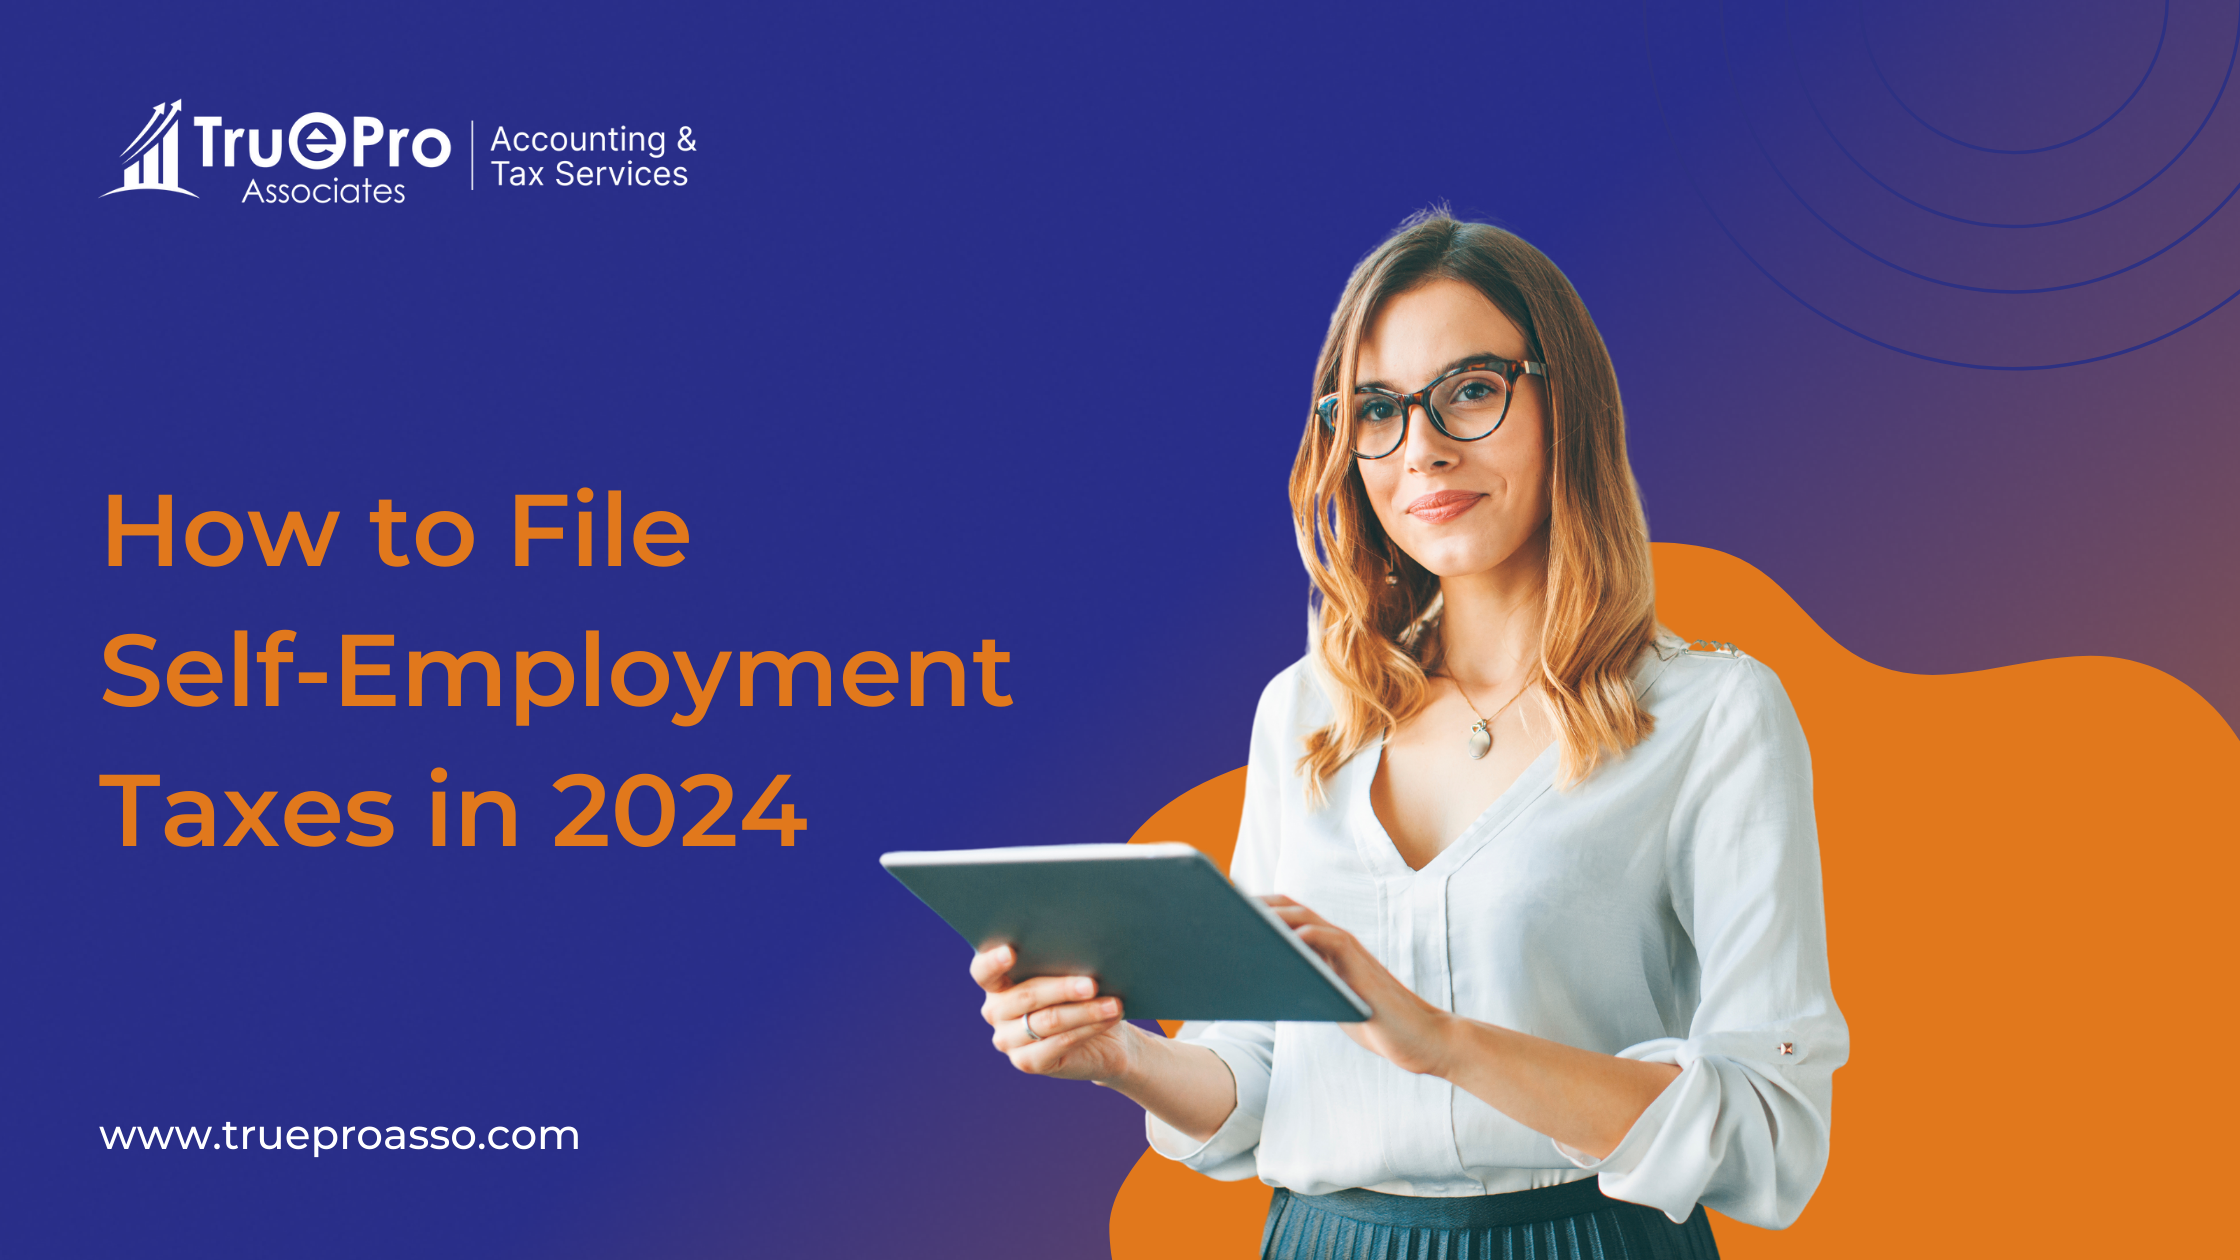 How to File Self-Employment Taxes in 2024